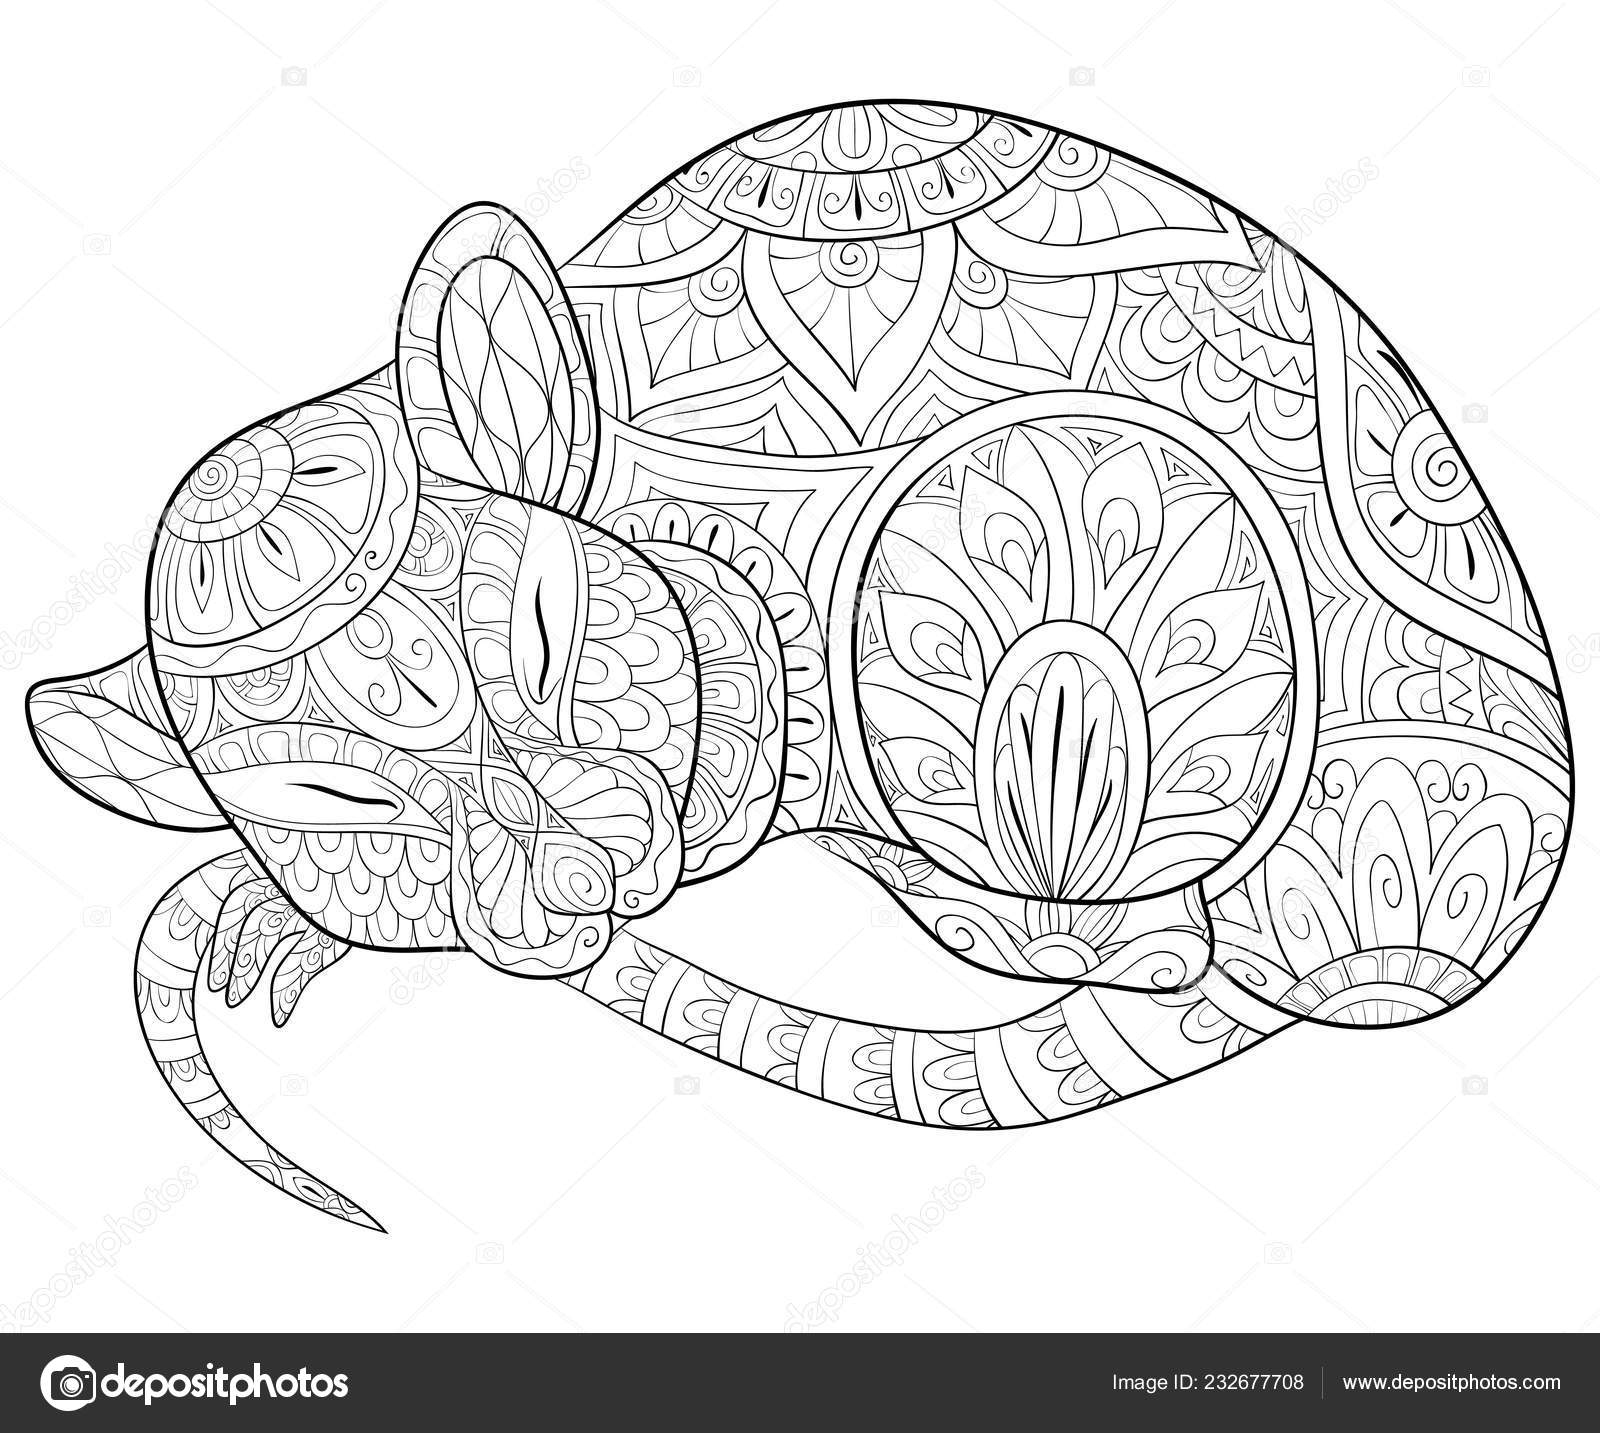 Cute sleeping rat ornaments image relaxing activity coloring book page stock vector by nonuzza